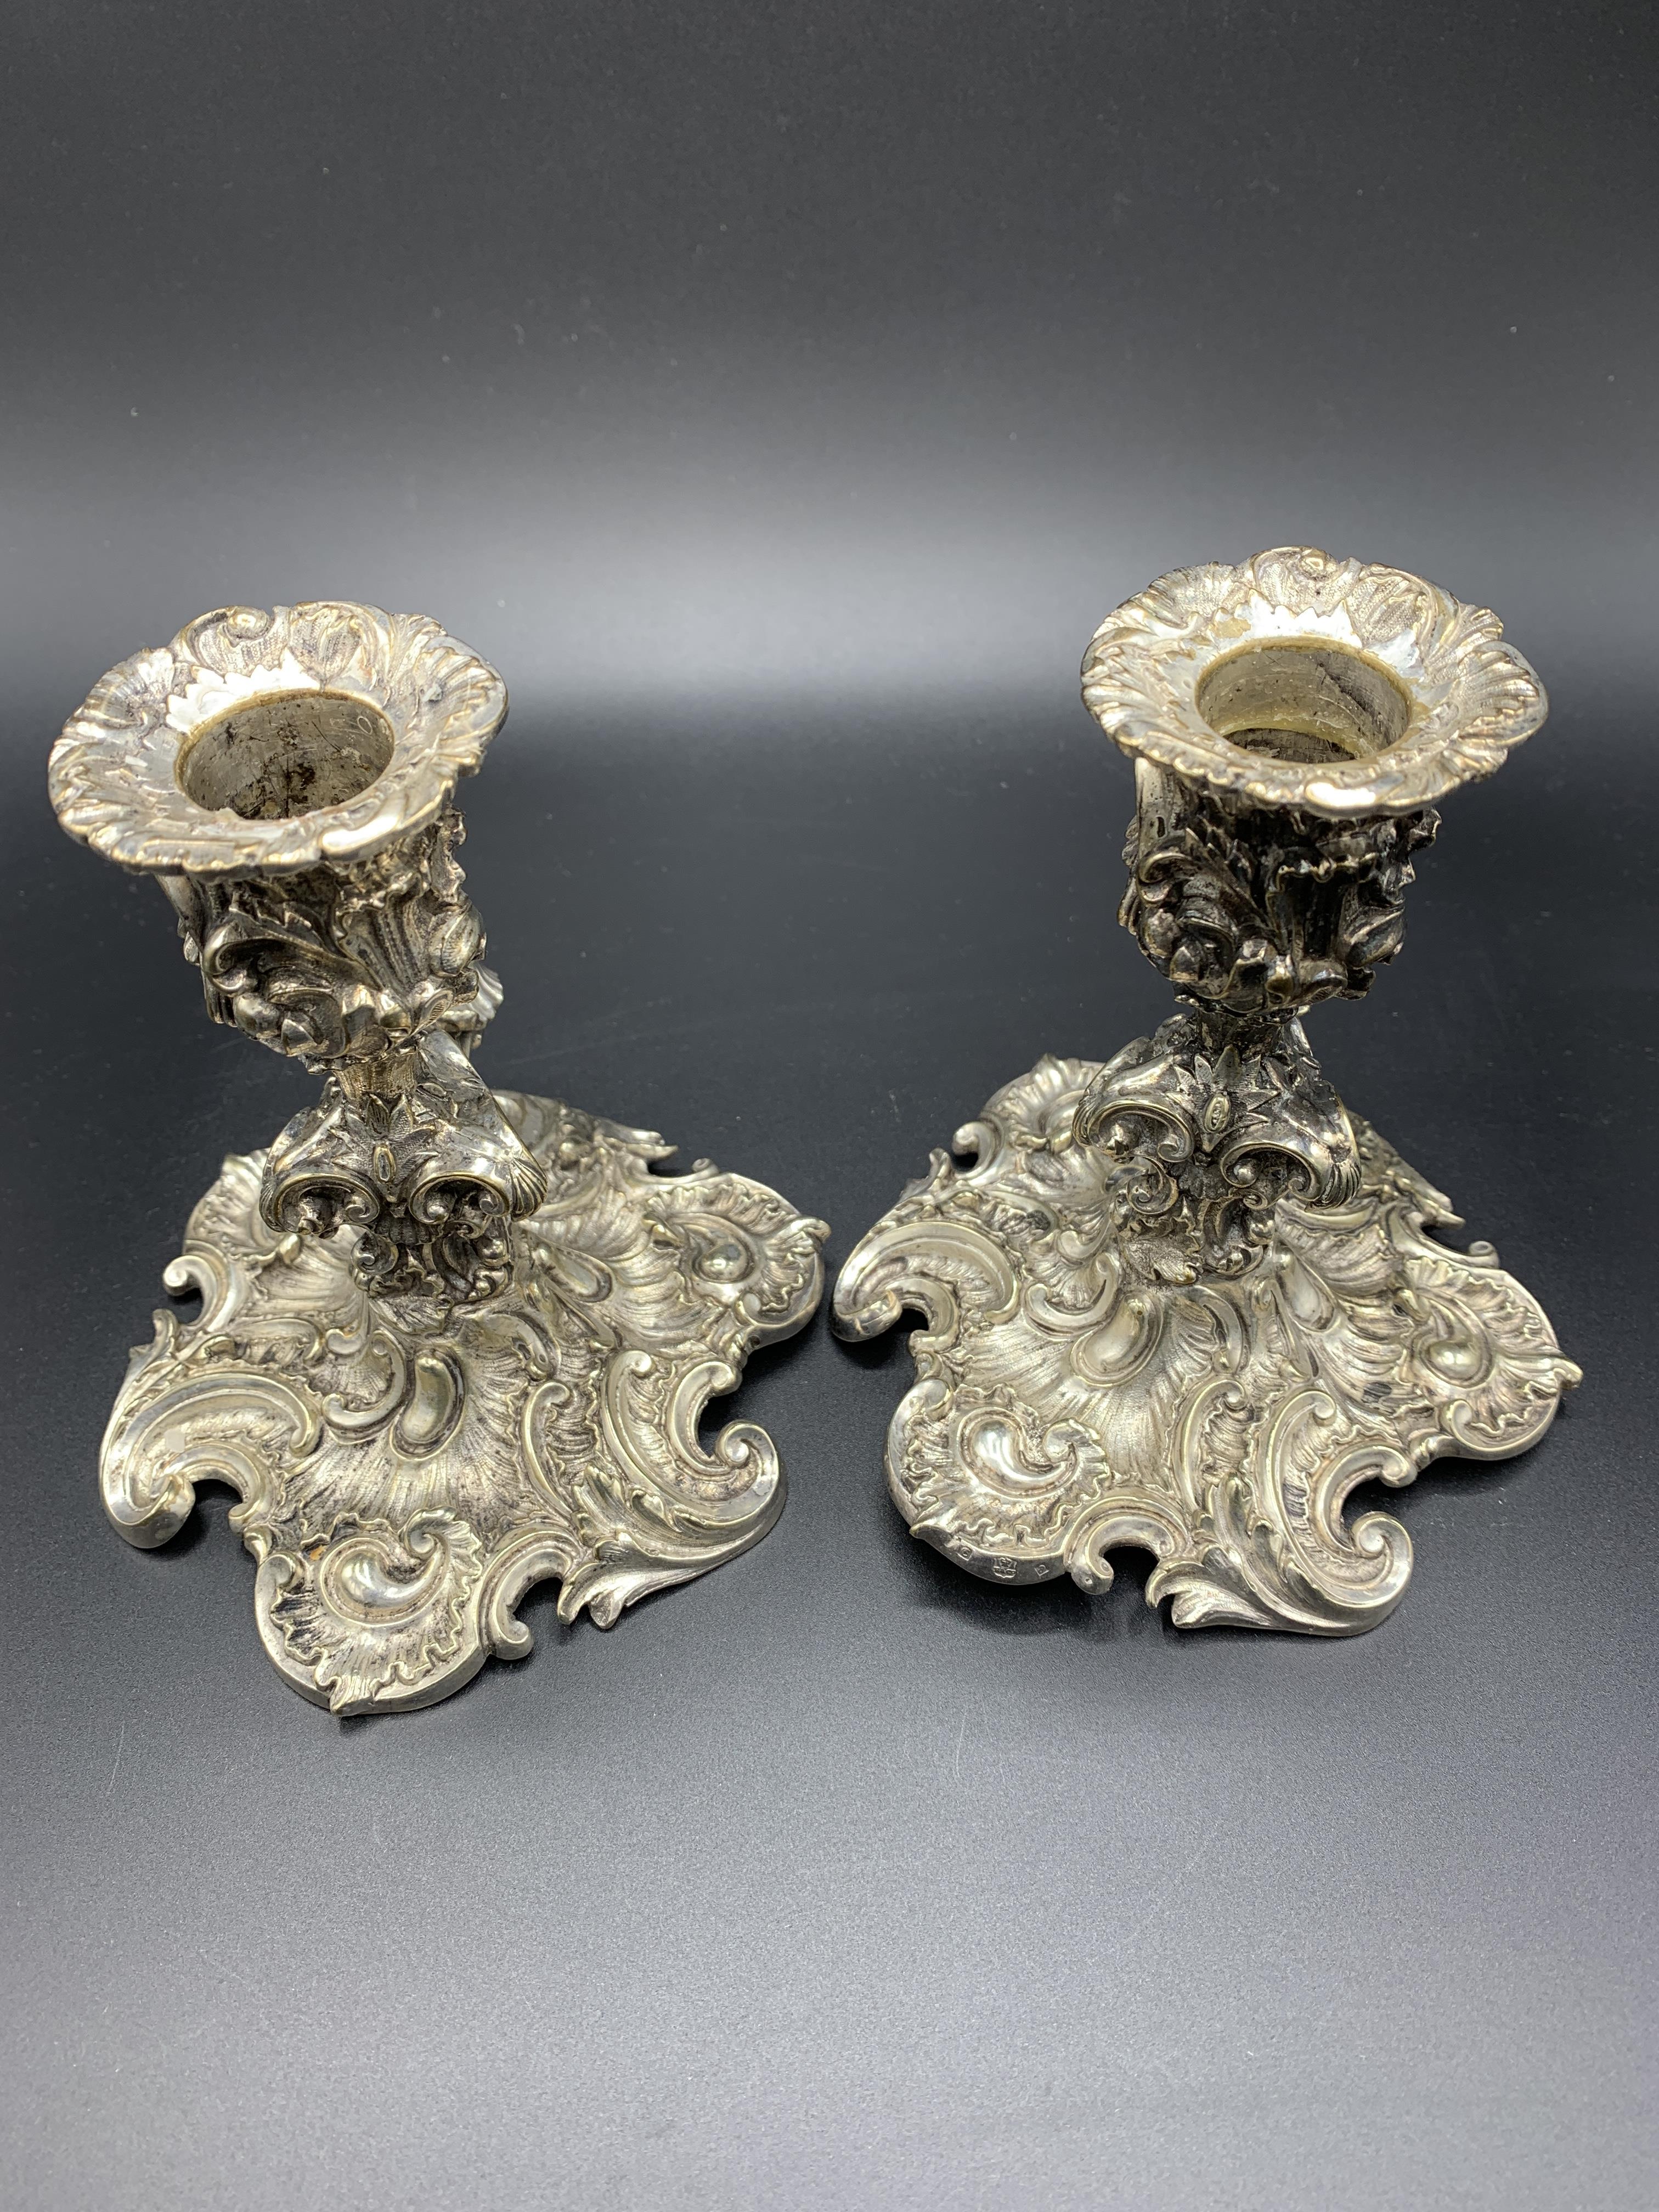 A pair of mid-19th century rococo silver plate candle holders by Elkington & Co - Image 4 of 4